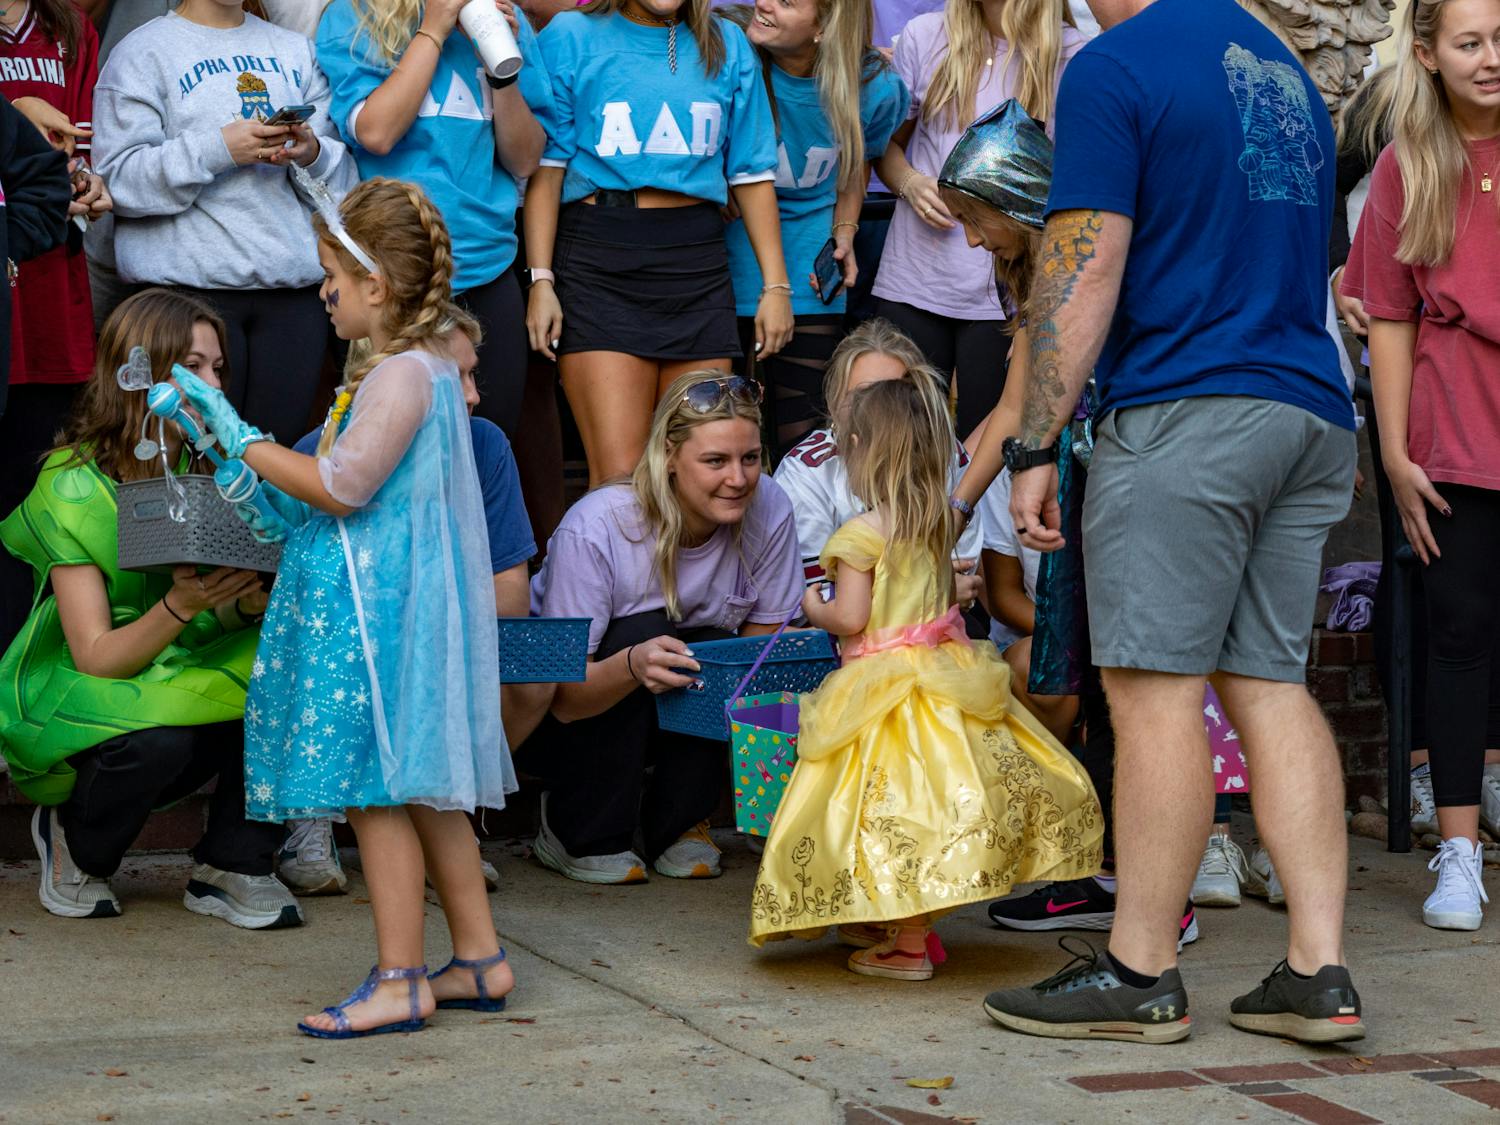 USC sorority sisters hand out candy to a pair of princess costumed trick or treaters during their Trick or Treat with the Greeks community event on Oct. 25, 2022. USC Greek fraternities and sorority gathered together in Greek Village with community members for games, fun activities and trick or treating.